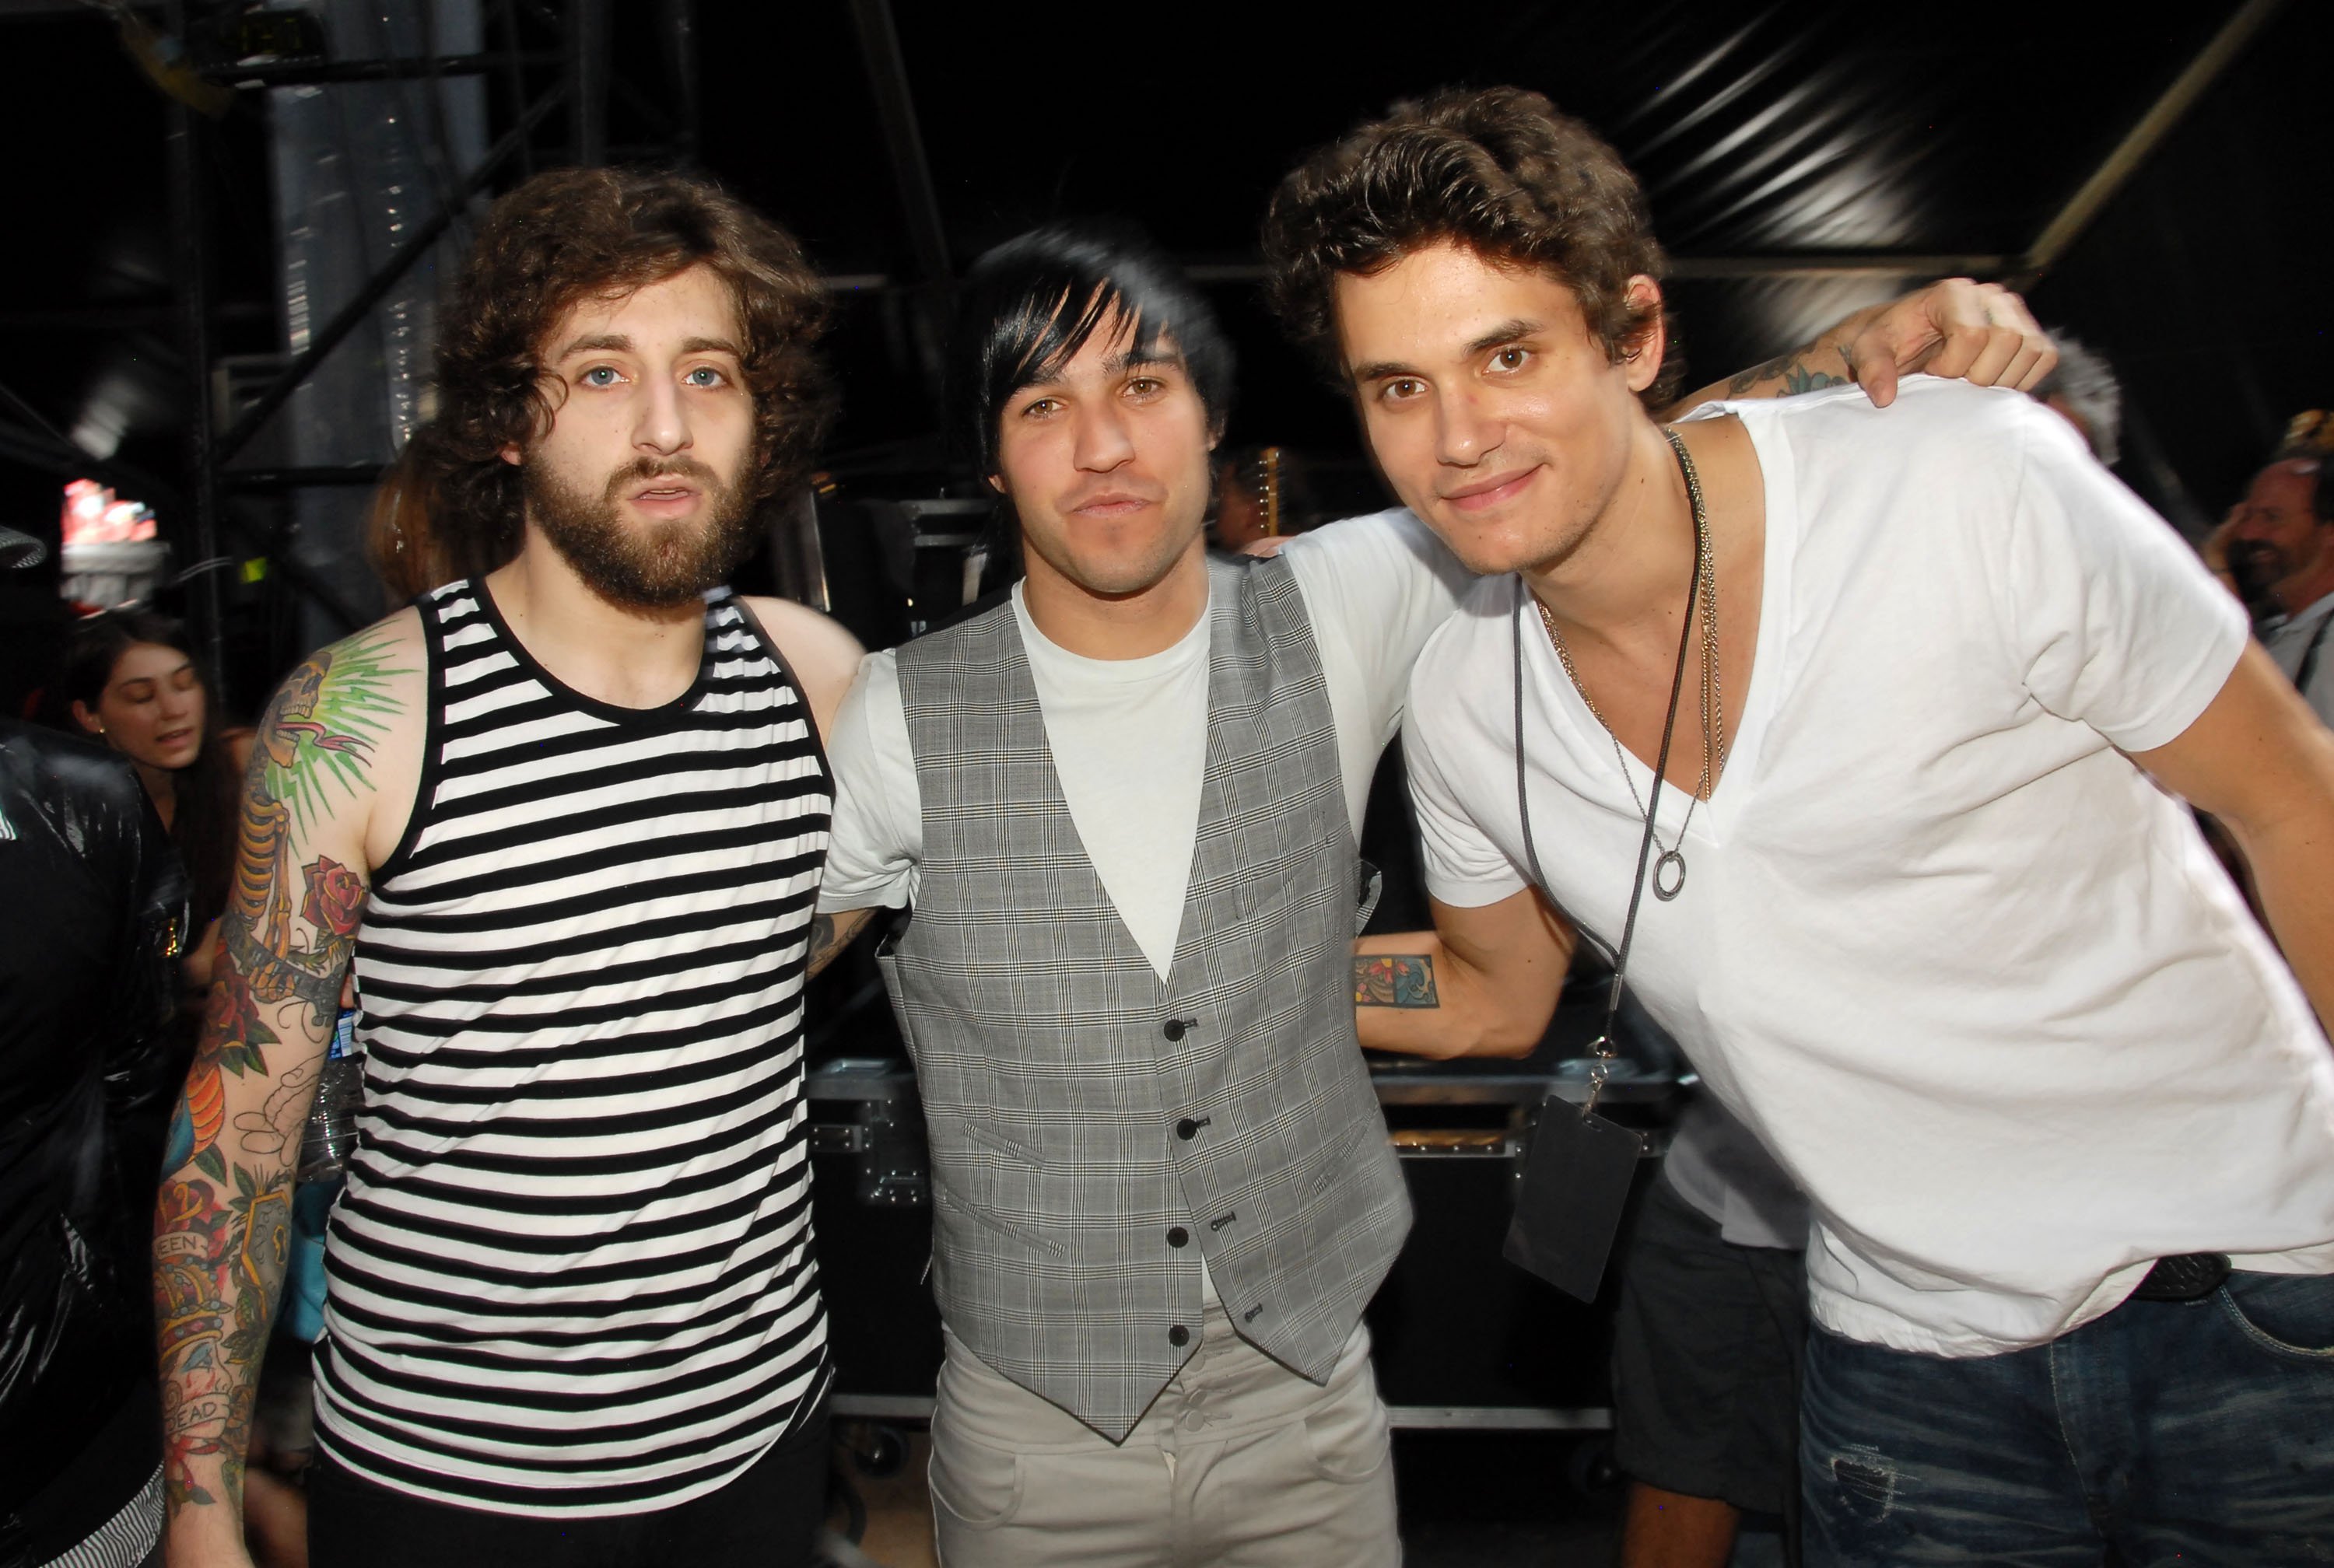 Joe Trohman and Pete Wentz of Fall Out Boy and John Mayer putting their arms around each other